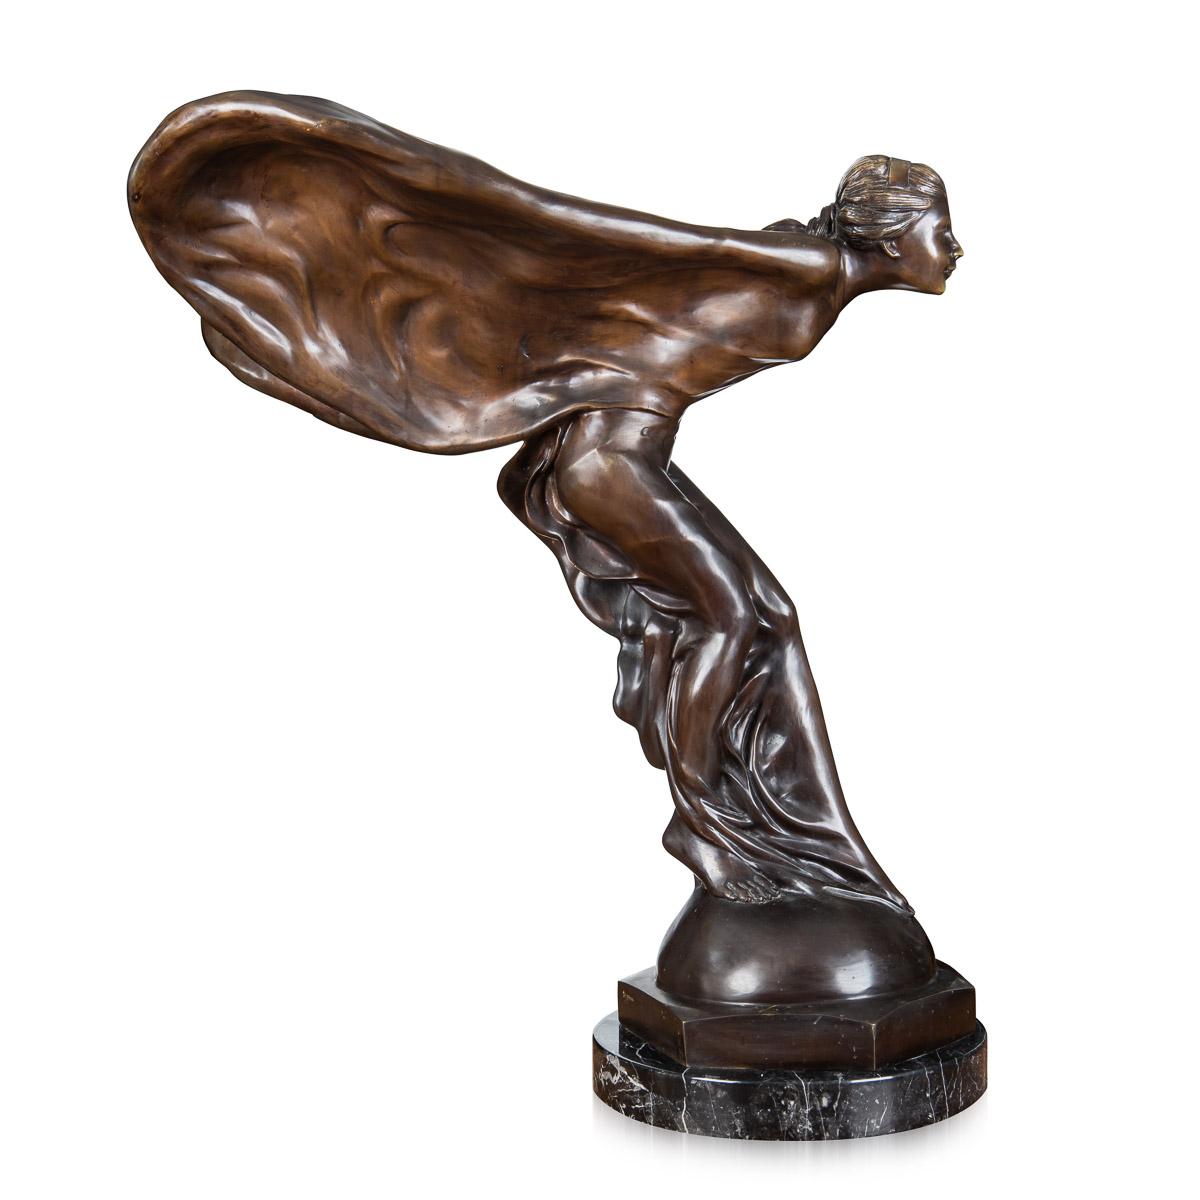 Antique early-20th Century French monumental showroom display bronze of the legendary Rolls-Royce mascot which was designed by Charles Sykes R.A, the dark patinated bronze sculpture set on a massive octagonal marble plinth. Signed by the artist in